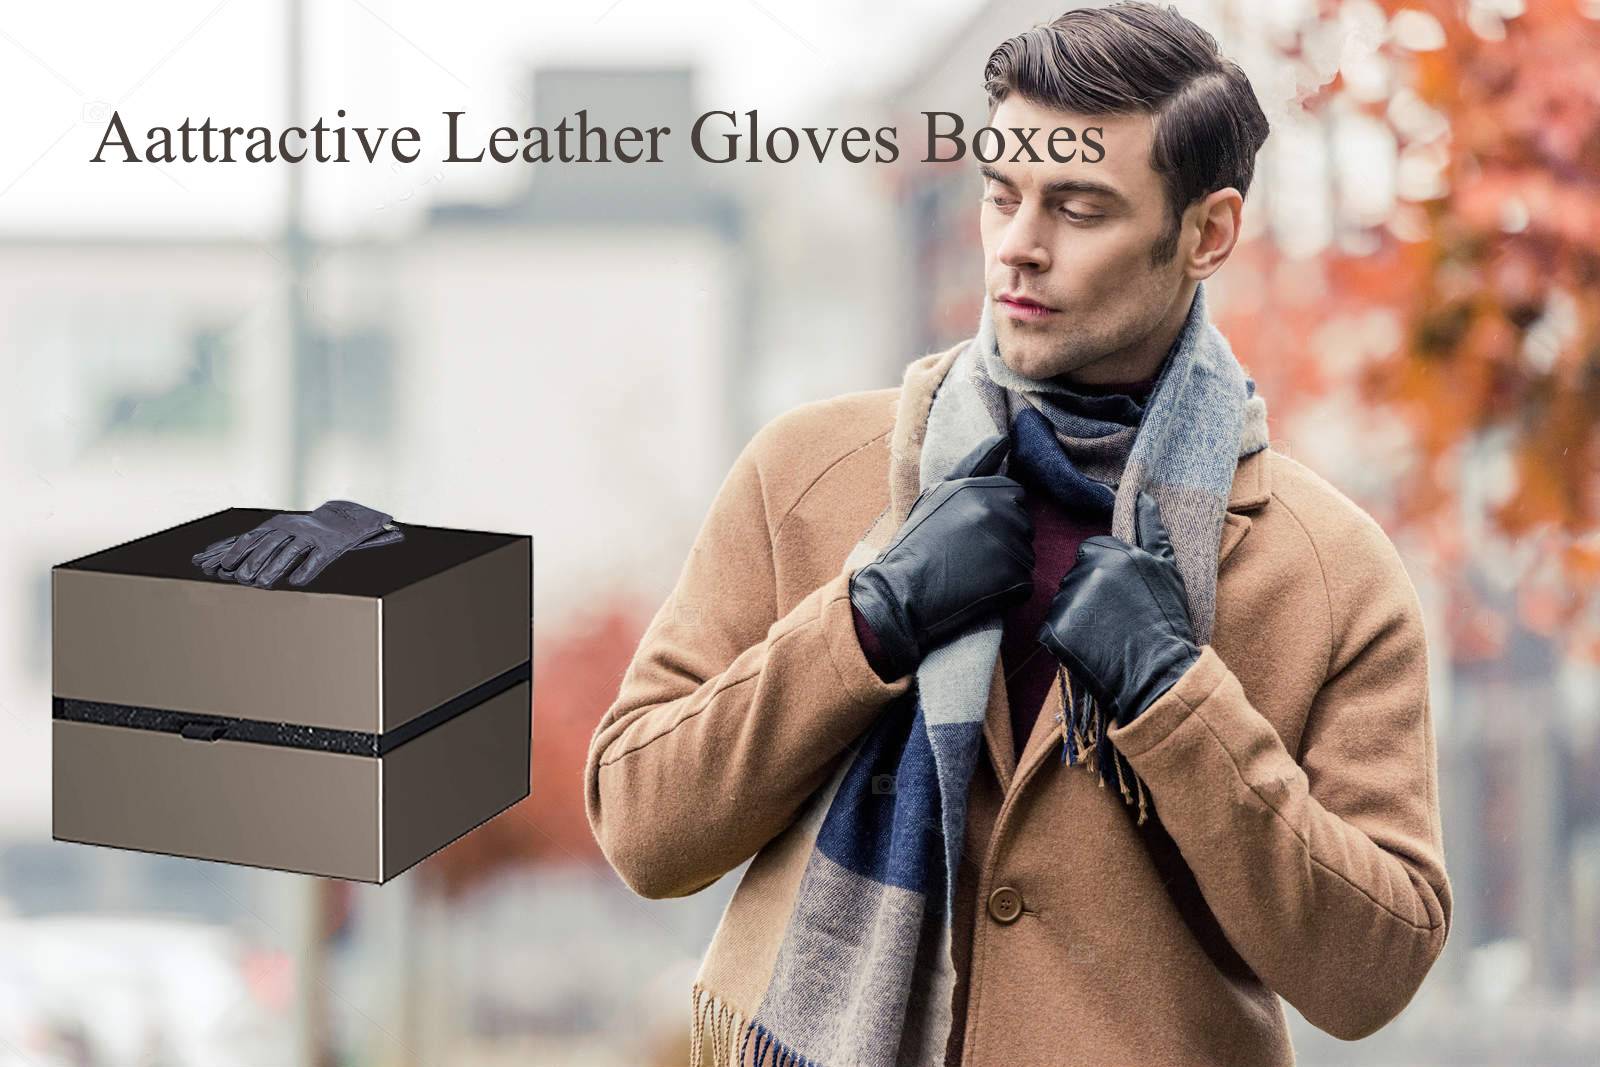 Custom Leather Gloves Boxes